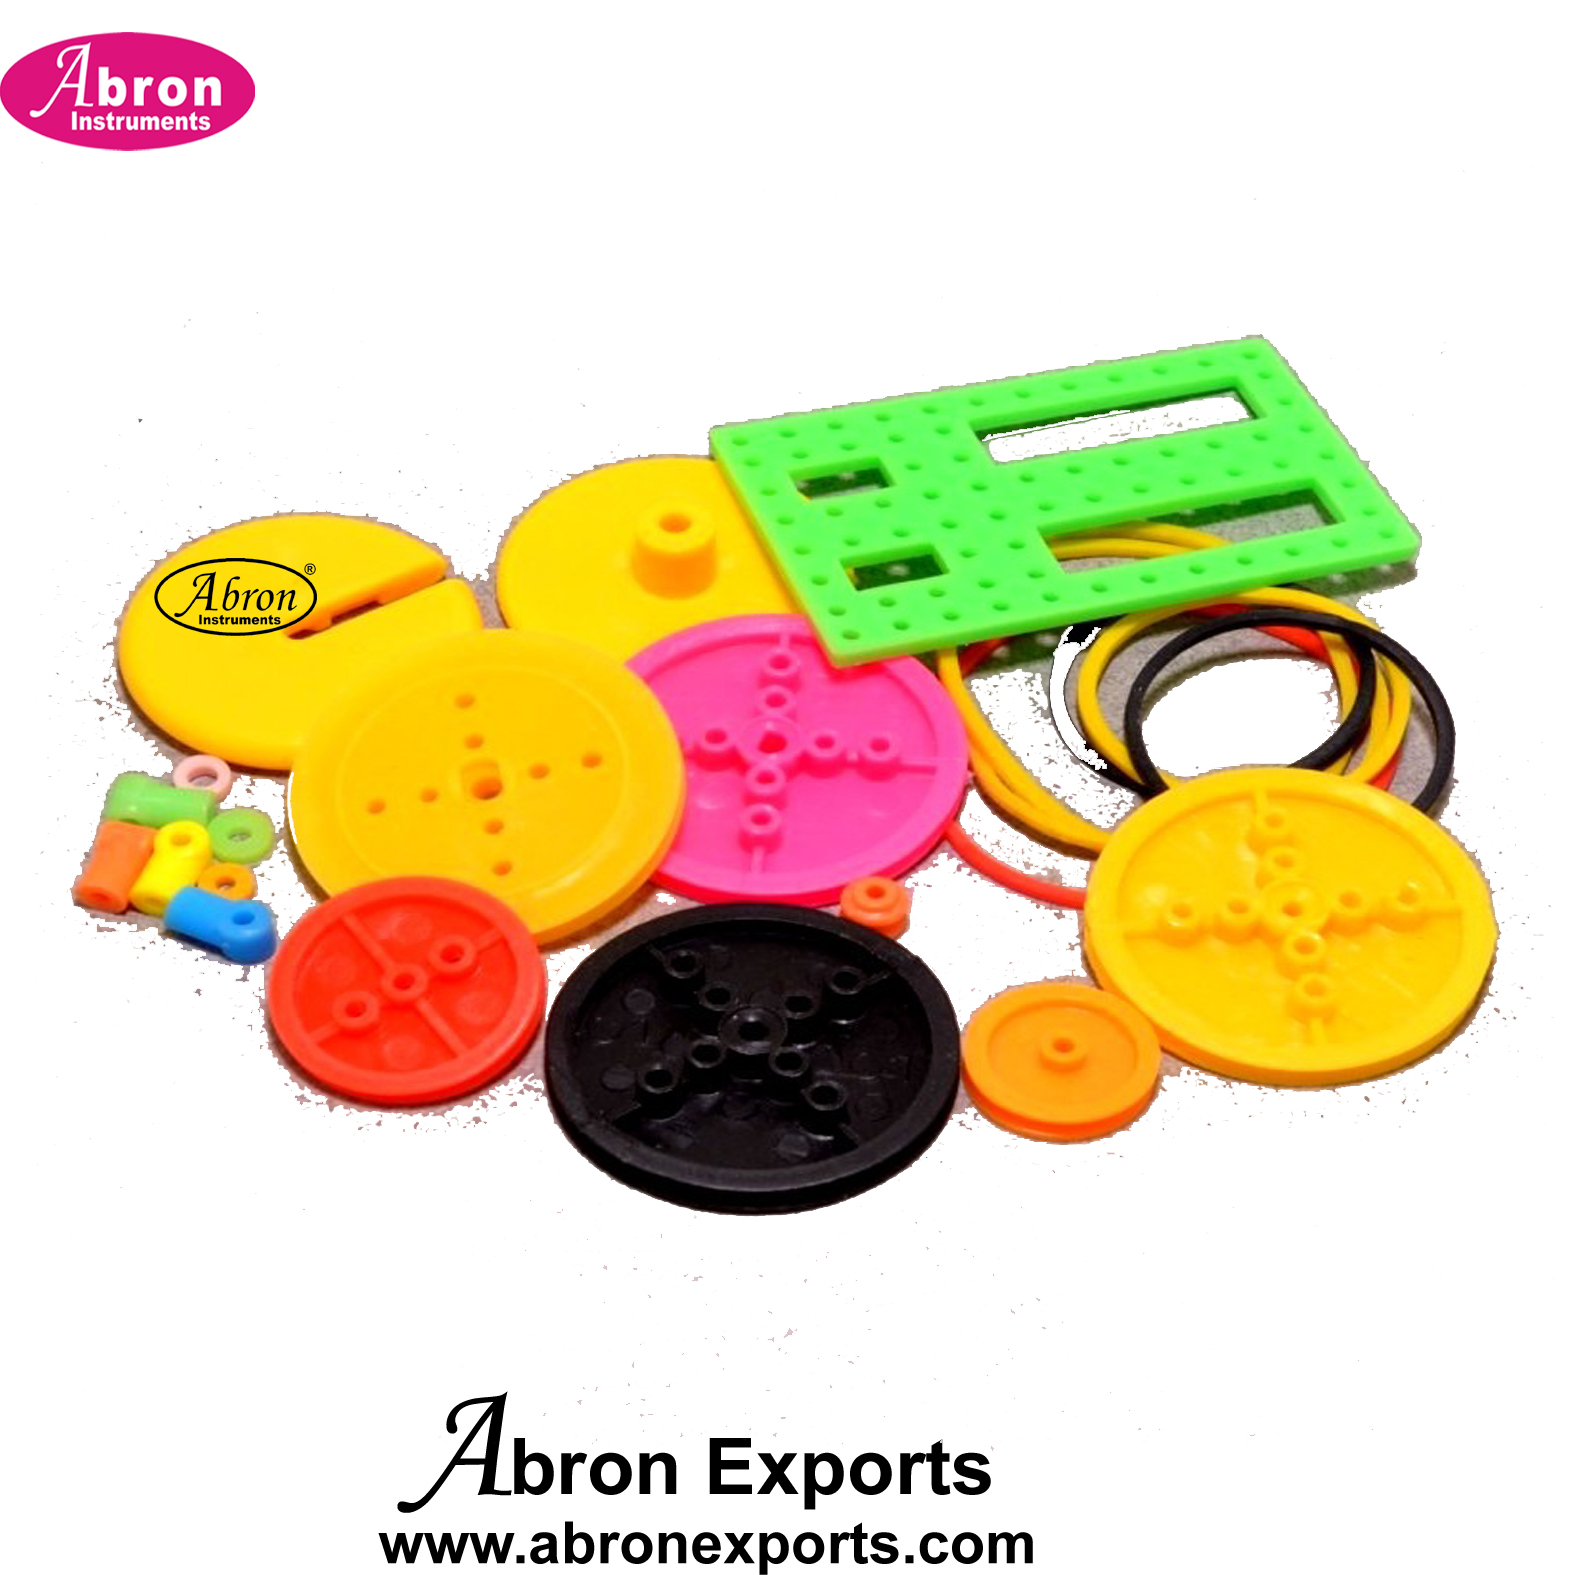 Model Gear system Colorful Plastic Motor Gear Assorted Kit Abron